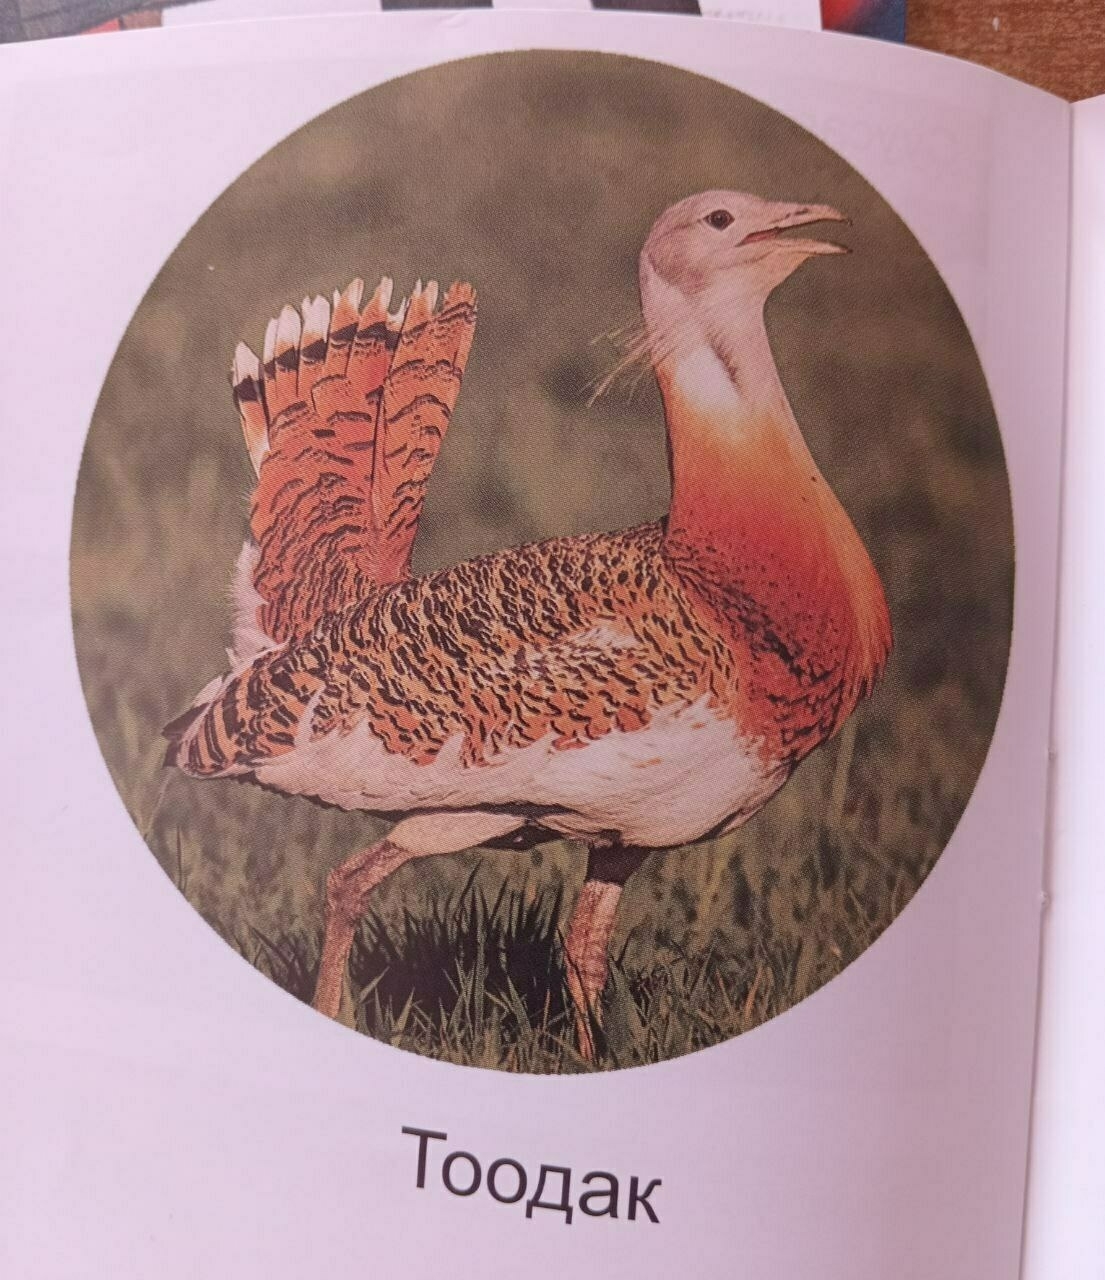 circular picture of a Great bustard bird, which looks a little bit like a small turkey or pheasant with the Kyrgyz name (тоодак) underneath